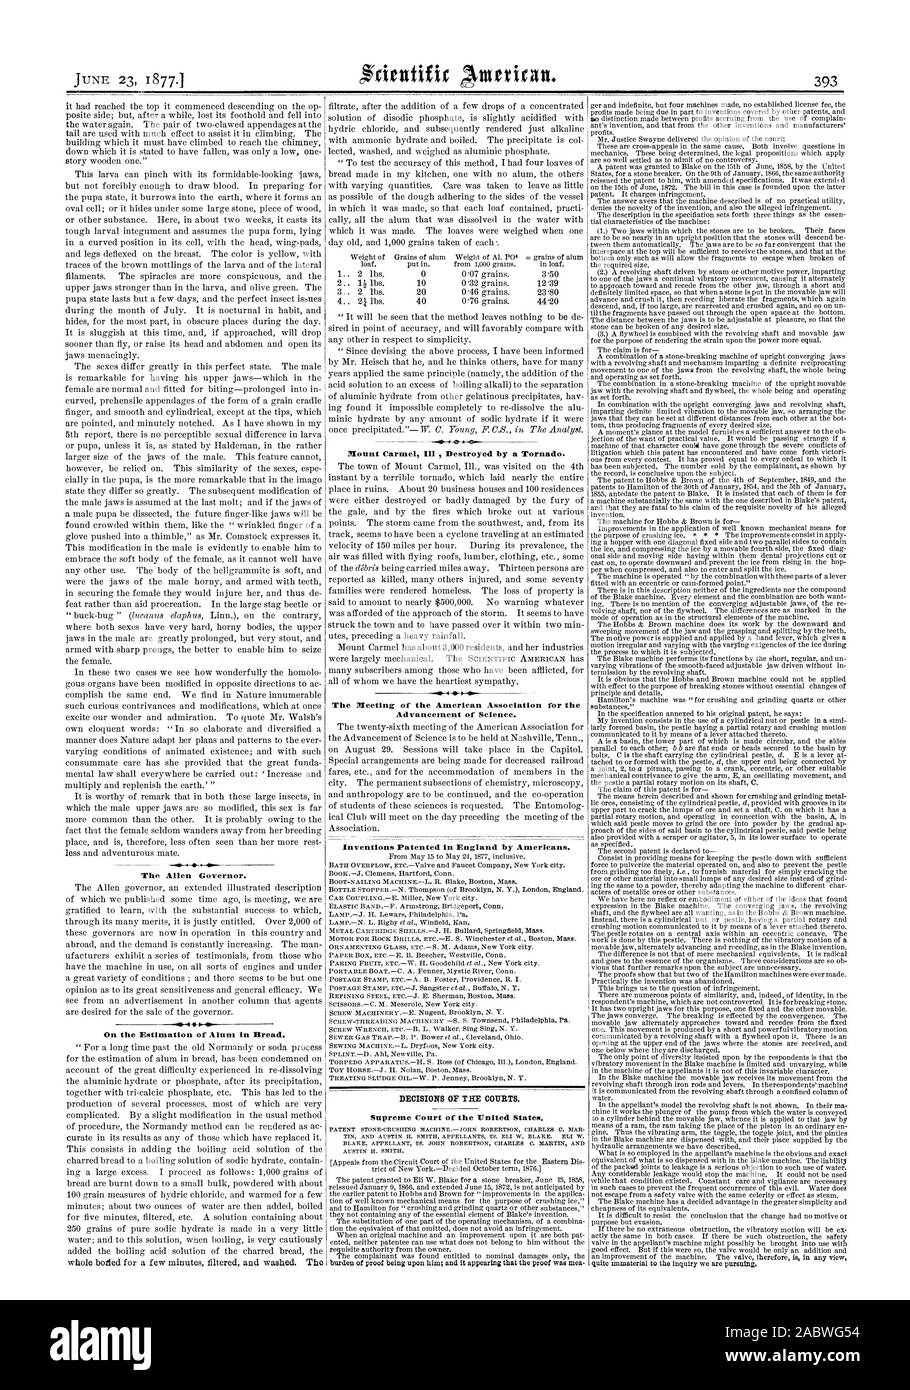 The Allen Governor. On the Estimation of Alum in Bread. whole boded for a few minutes filtered and washed. The Mount Carmel   Destroyed by a Tornado. The Meeting of the American Association for the Inventions Patented in England by Americans. TIN AND AUSTIN H. SMITH APPELLANTS VS. ELI W. BLAKE. ELI W. AUSTIN H. SMITH. DECISIONS OF THE COURTS., scientific american, 1877-06-23 Stock Photo